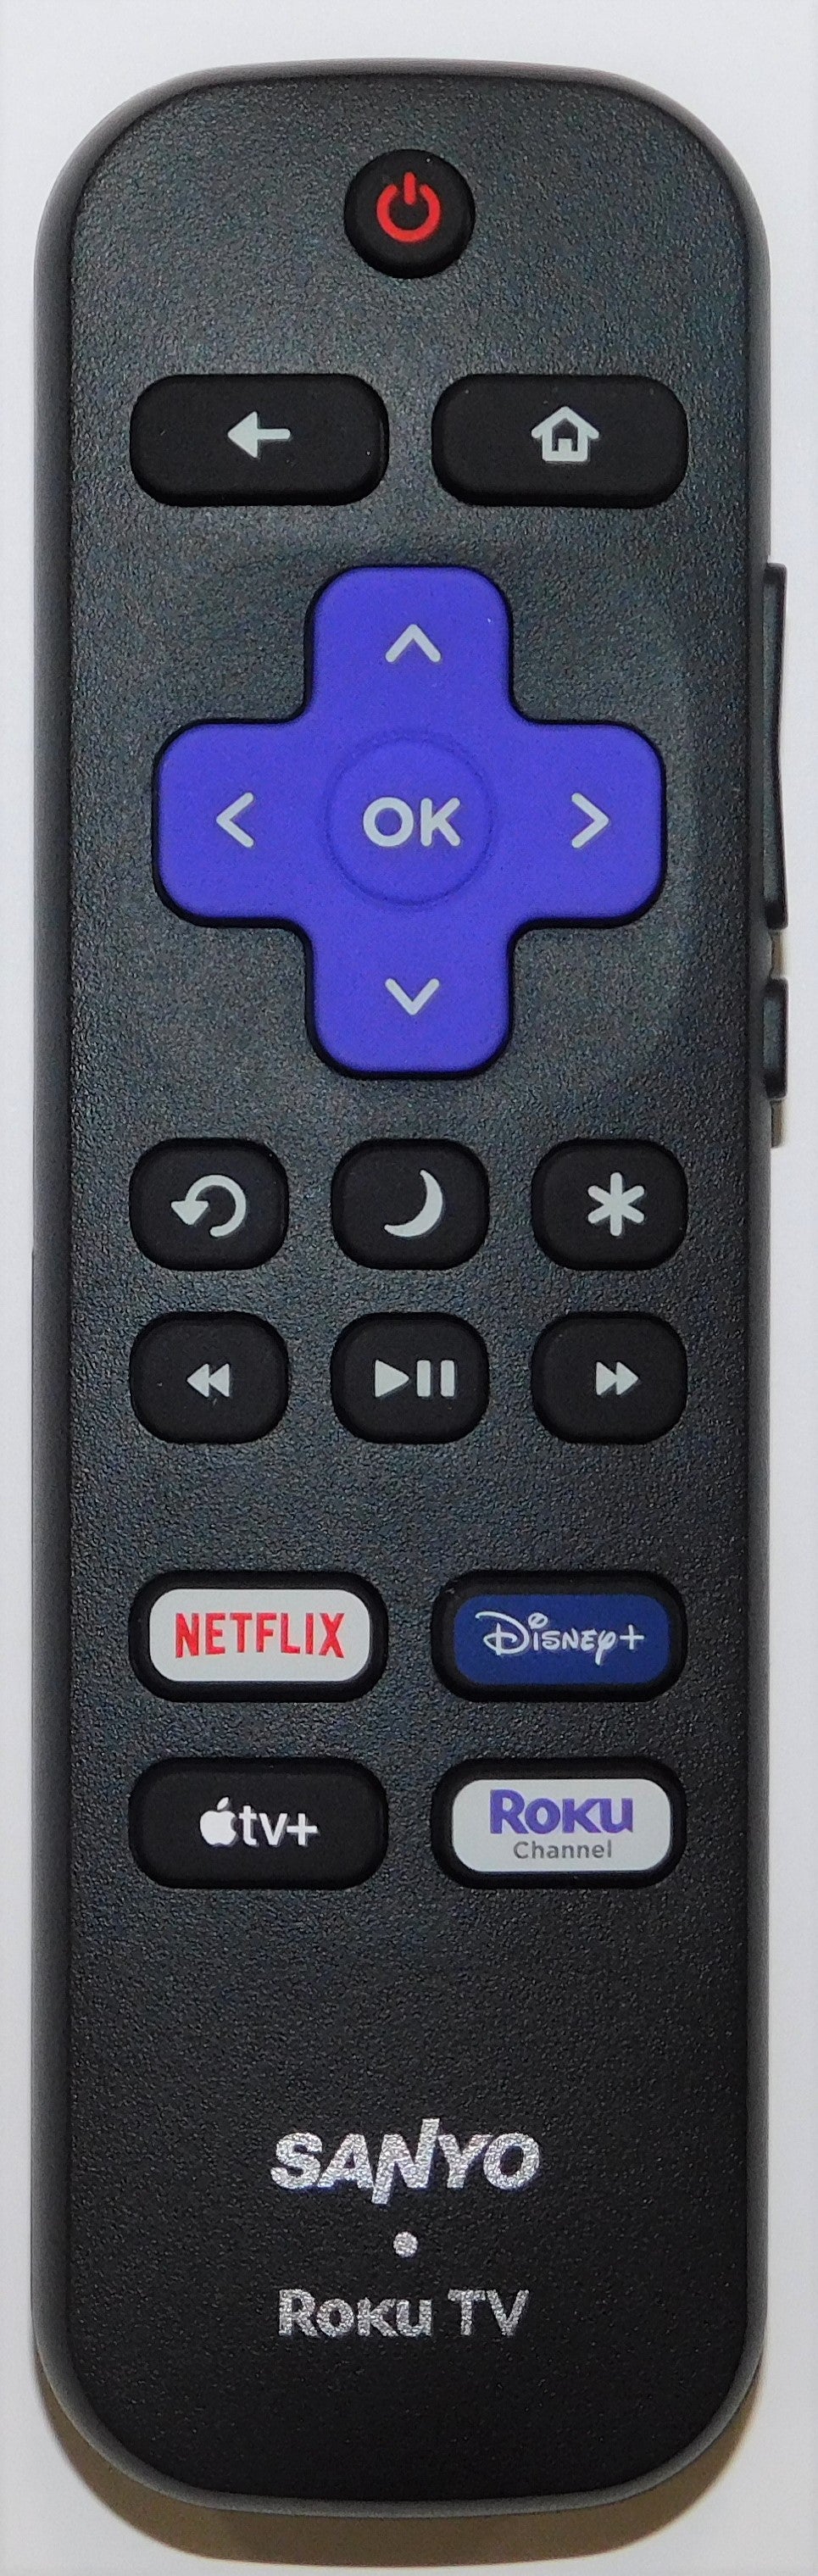 OEM replacement remote control for Sanyo Roku TV URMT21CND028